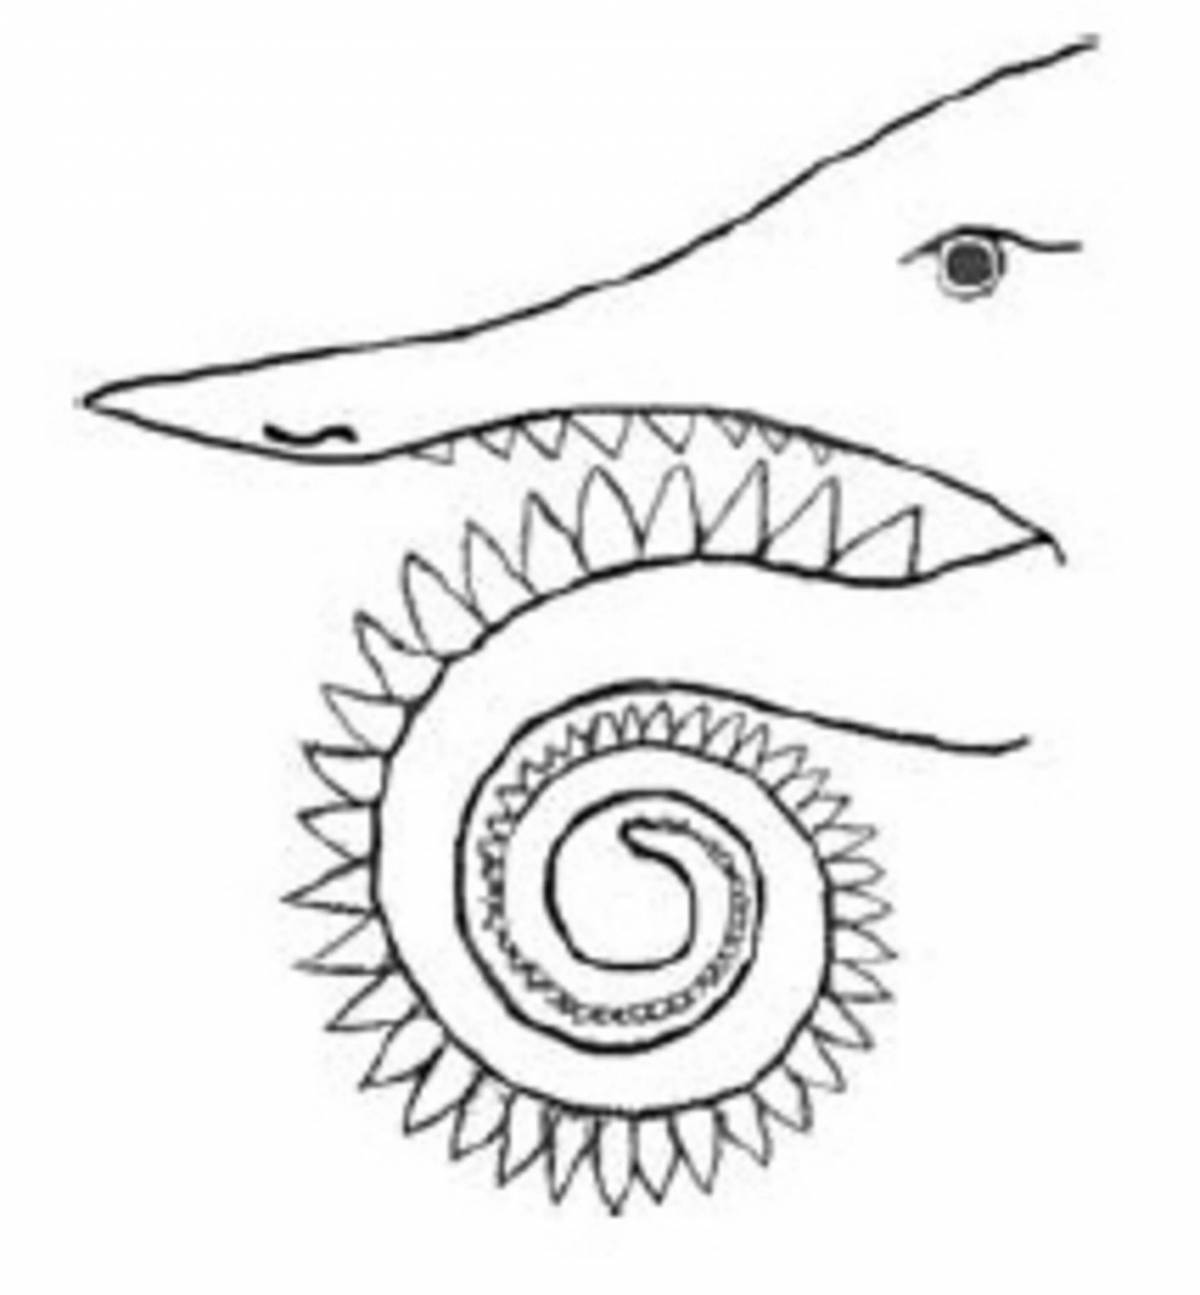 Zany helicoprion coloring book